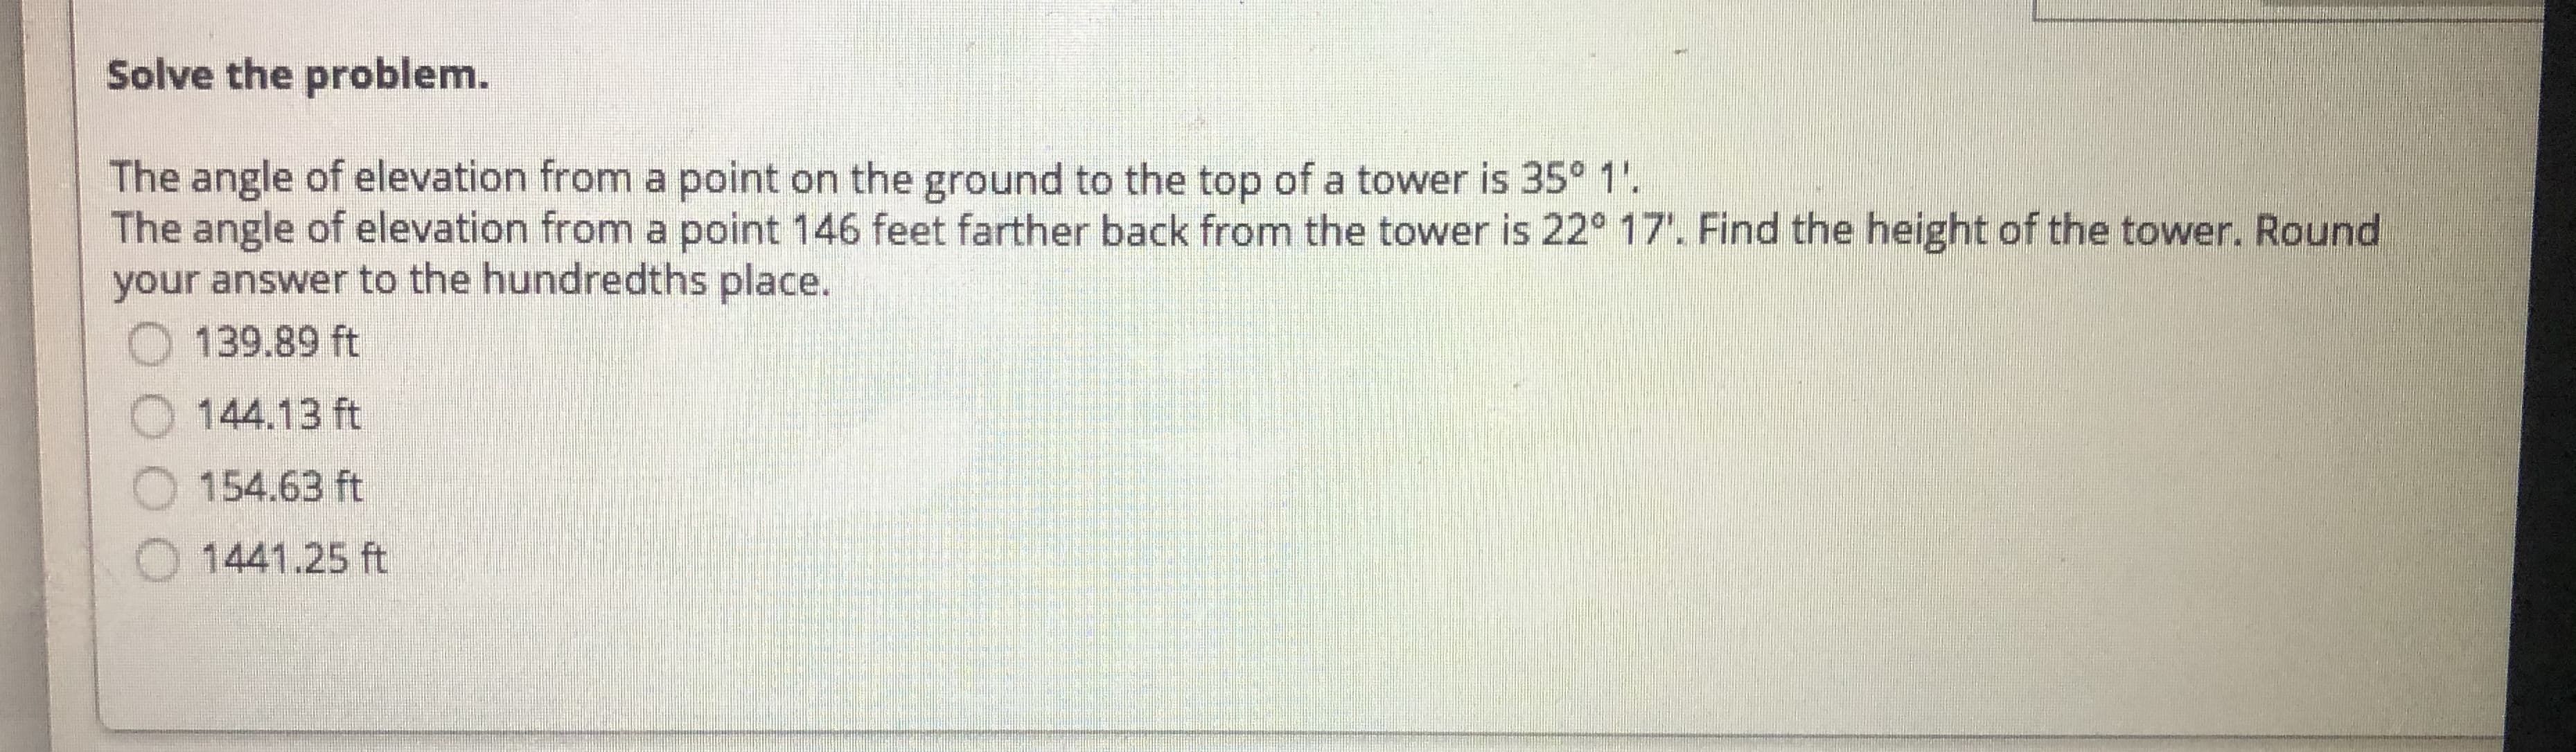 Solve the problem.
The angle of elevation from a point on the ground to the top of a tower is 35° 1'.
The angle of elevation from a point 146 feet farther back from the tower is 22° 17. Find the height of the tower. Round
your answer to the hundredths place.
O 139.89 ft
144.13 ft
O 154.63 ft
O 1441.25 ft
